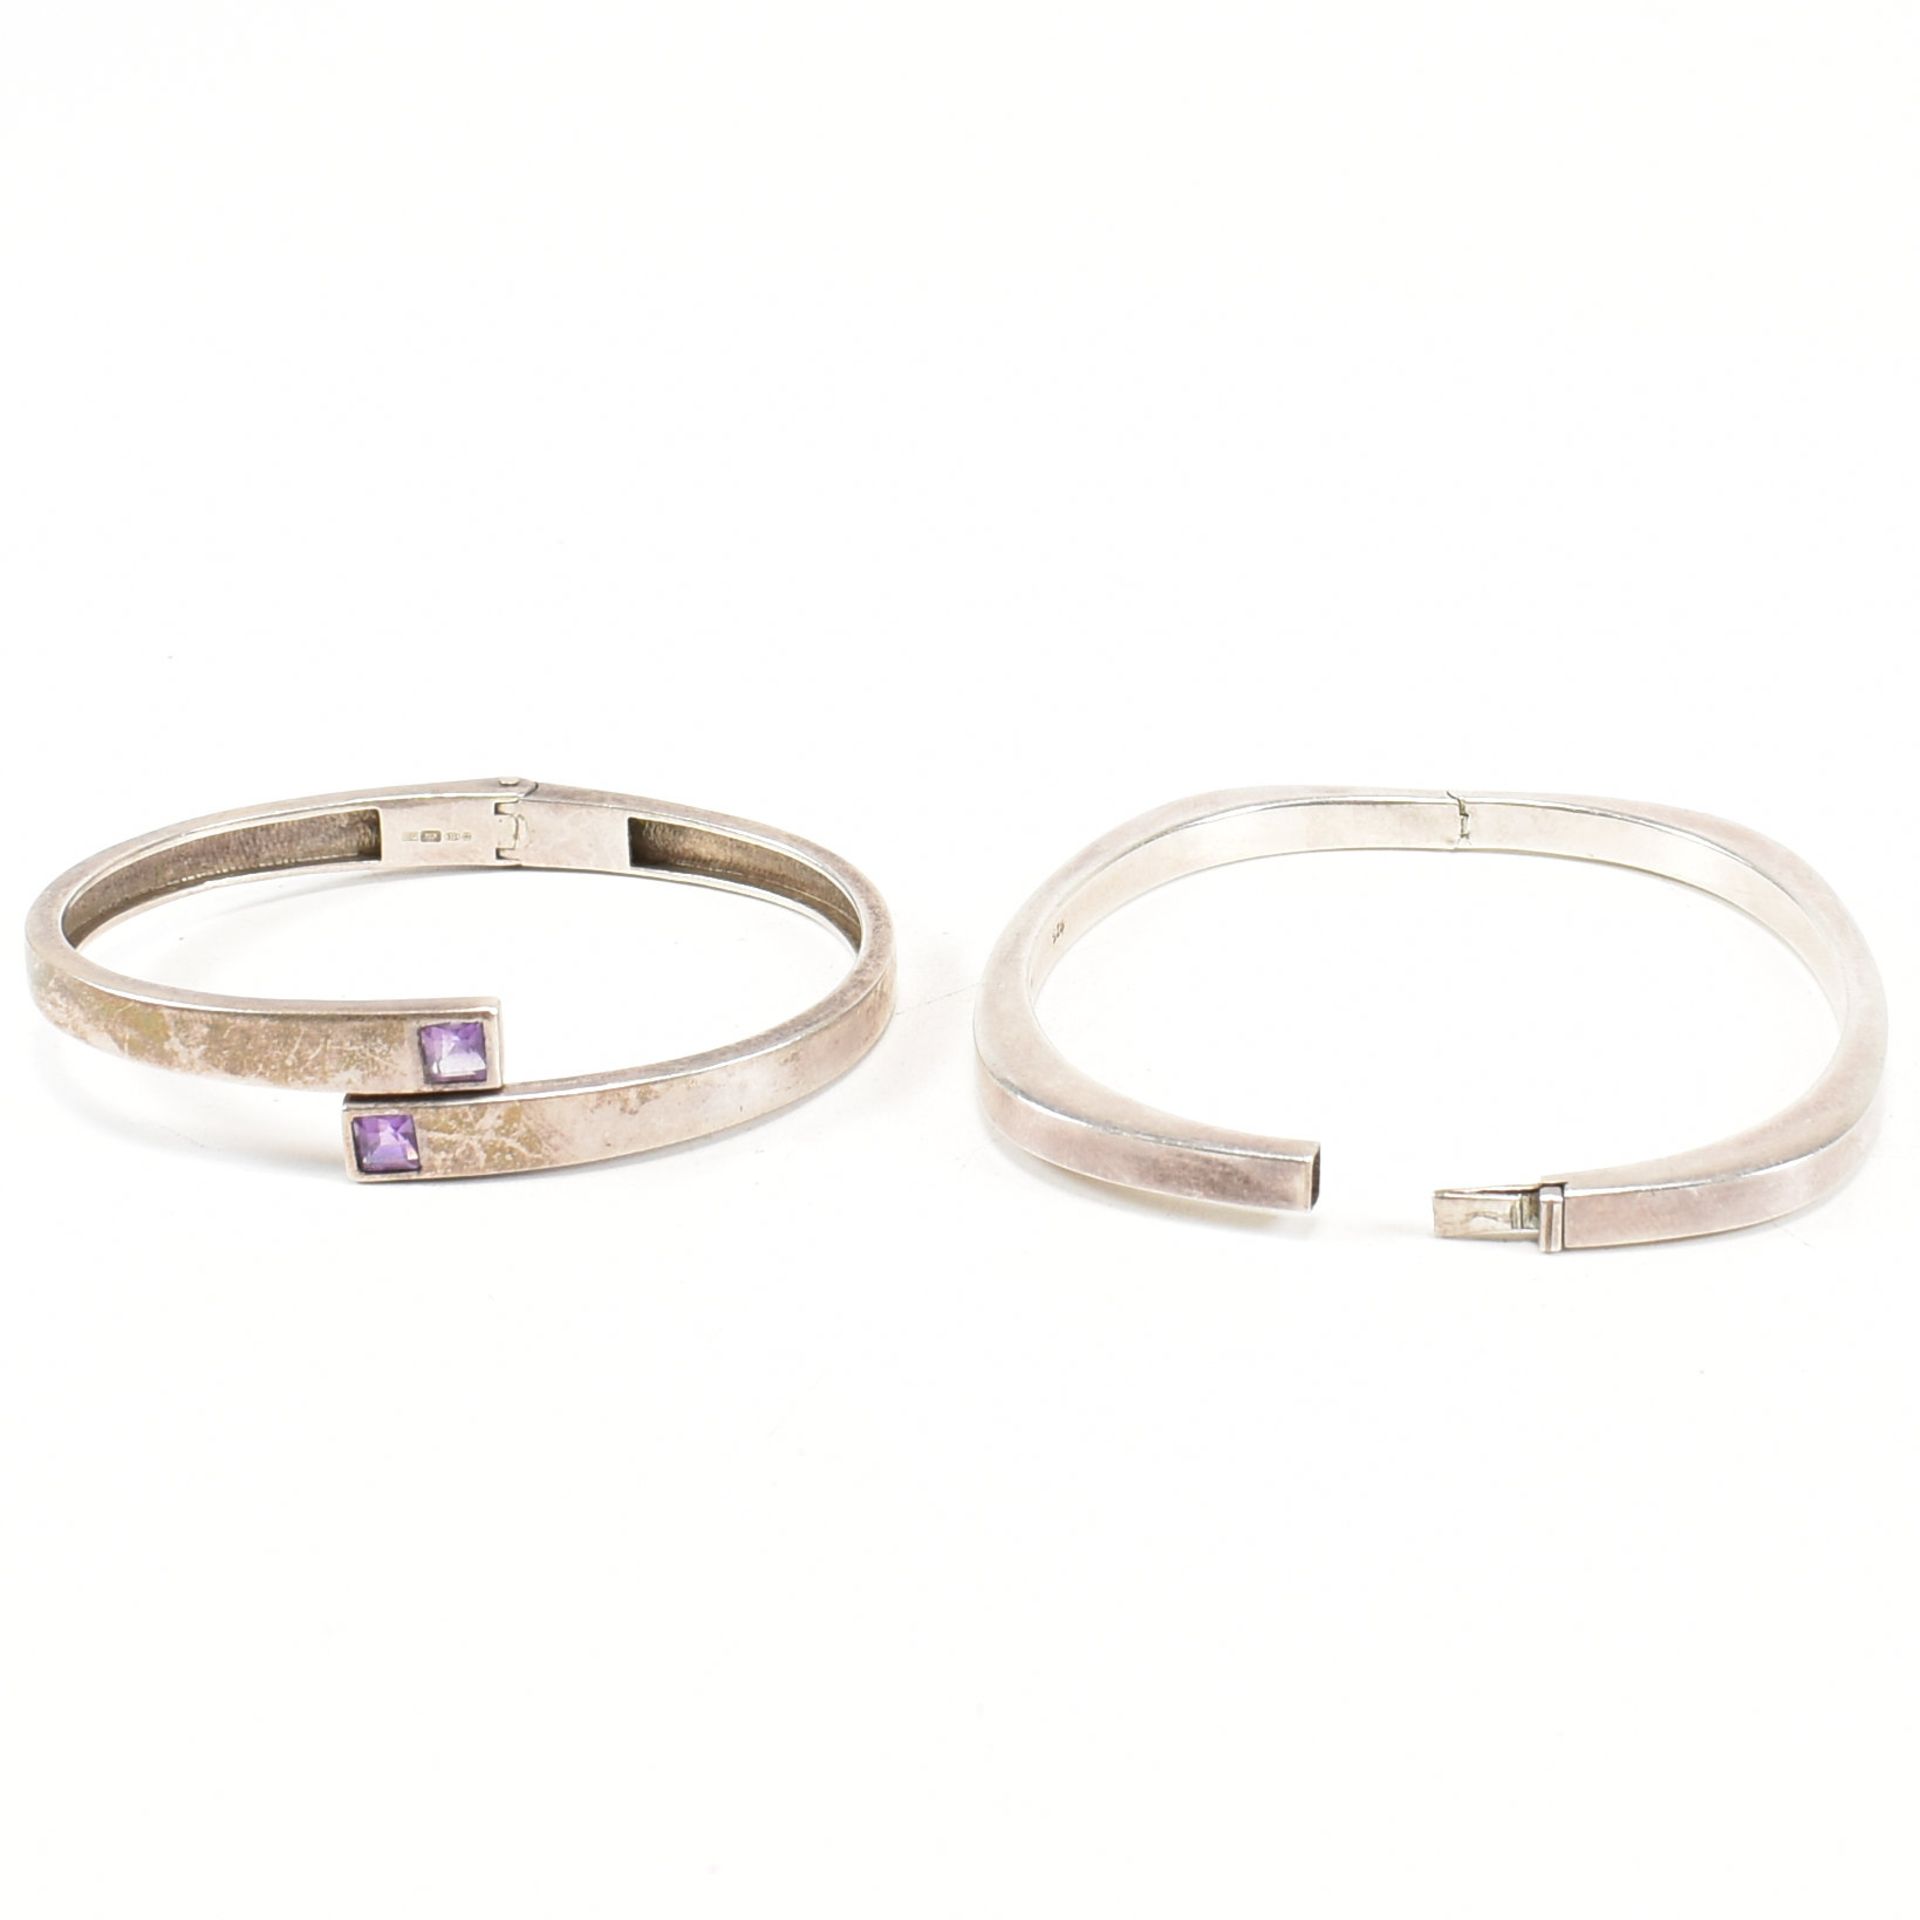 TWO HALLMARKED 925 SILVER BANGLES - Image 4 of 5